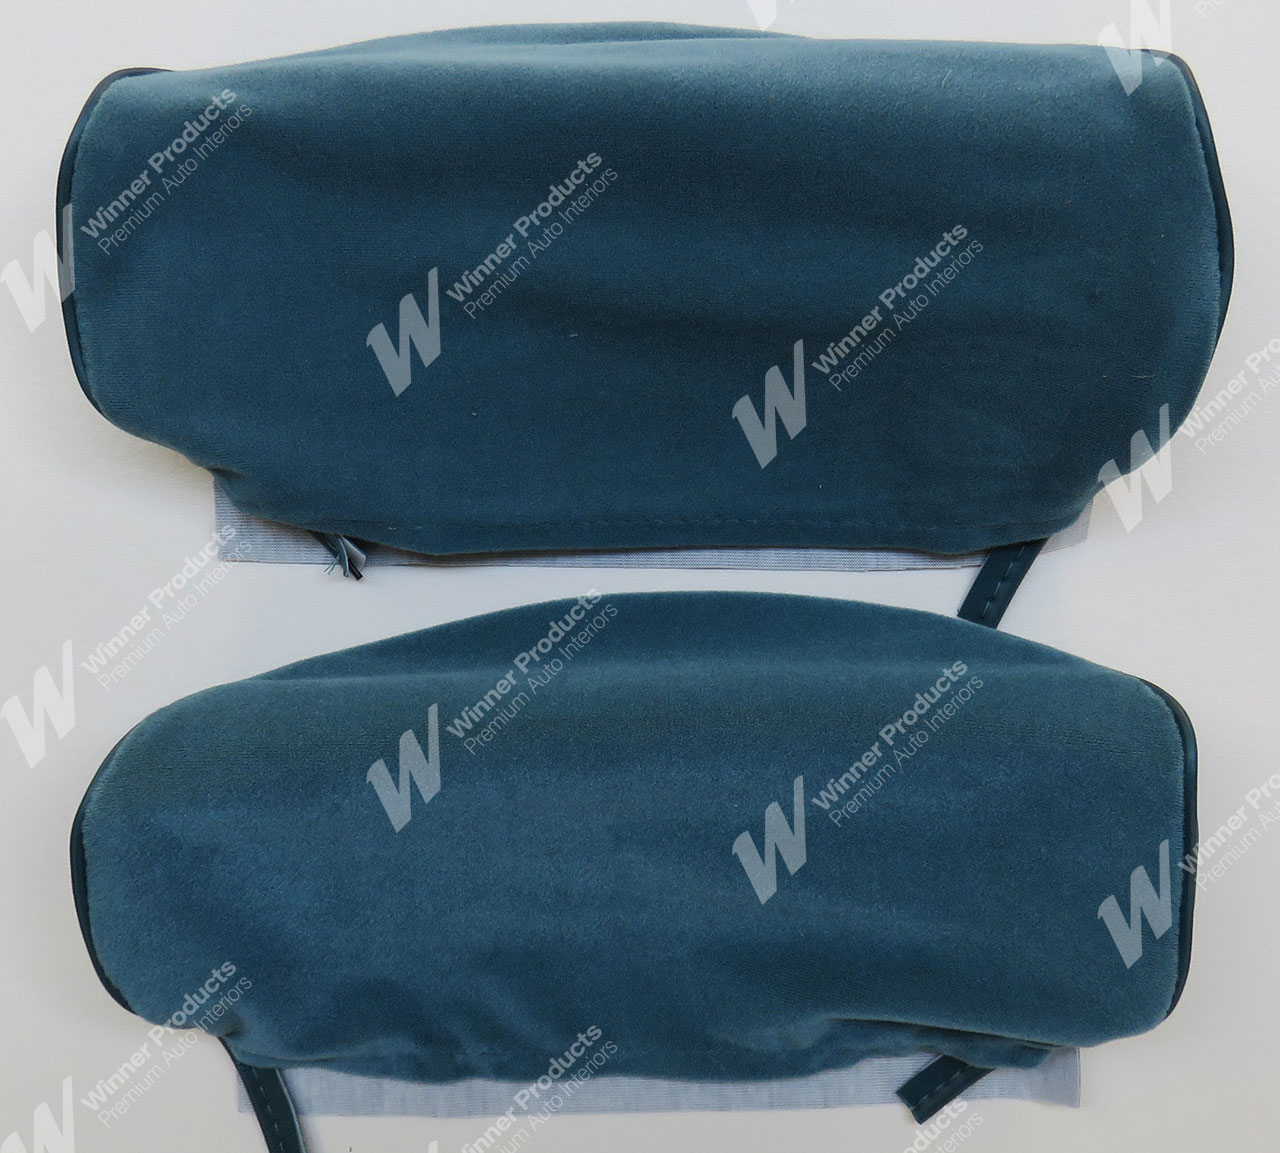 Holden Commodore VK SS Sedan 23X Cerulean Seat Covers (Image 7 of 8)